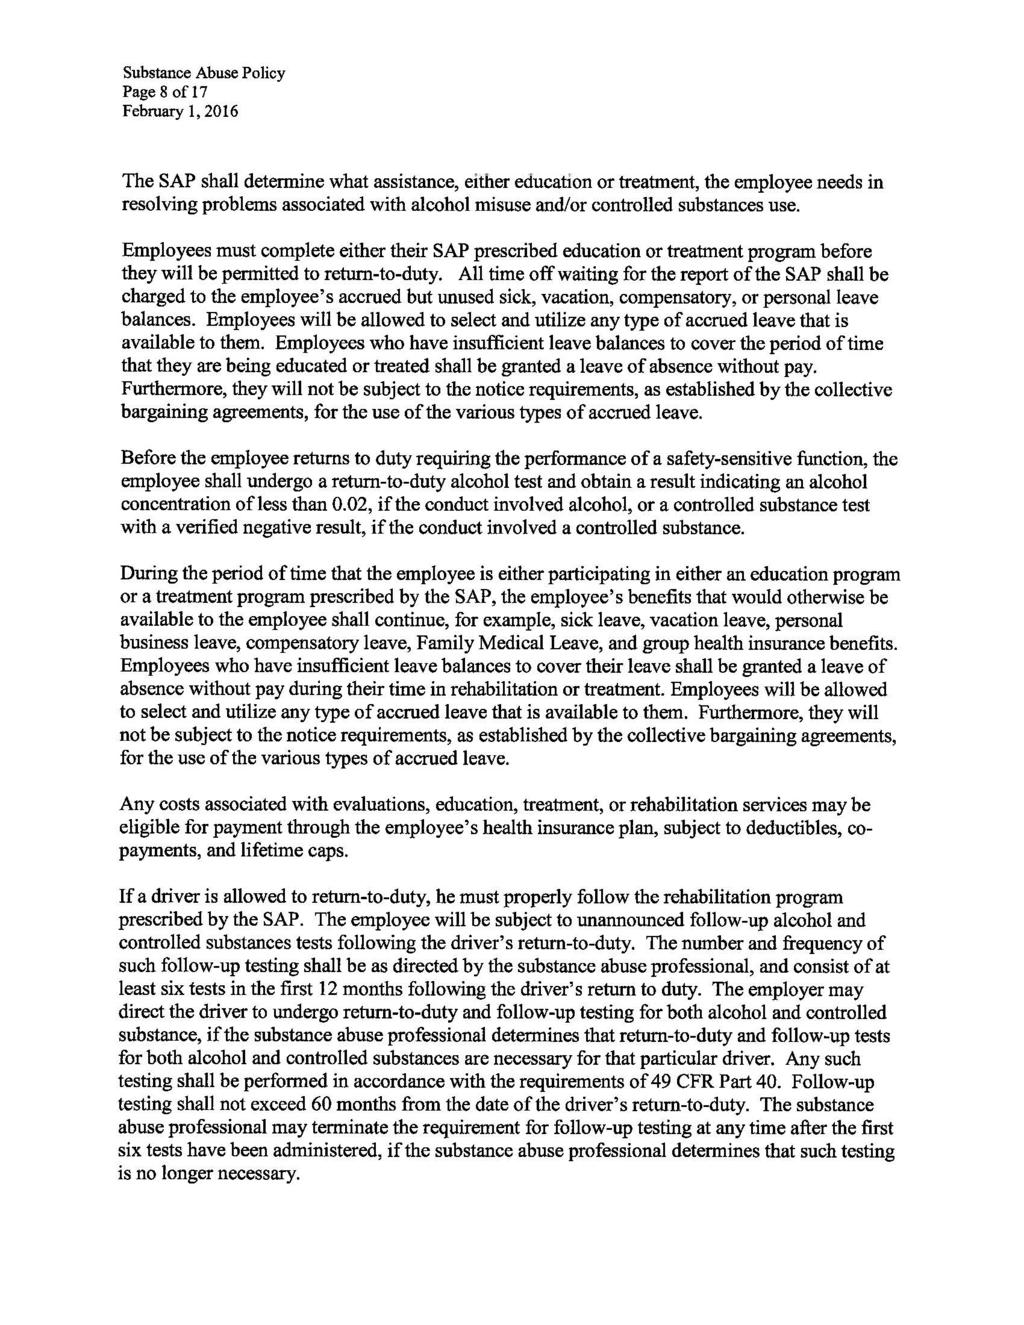 Page 8 of 17 The SAP shall determine what assistance, either education or treatment, the employee needs in resolving problems associated with alcohol misuse and/or controlled substances use.